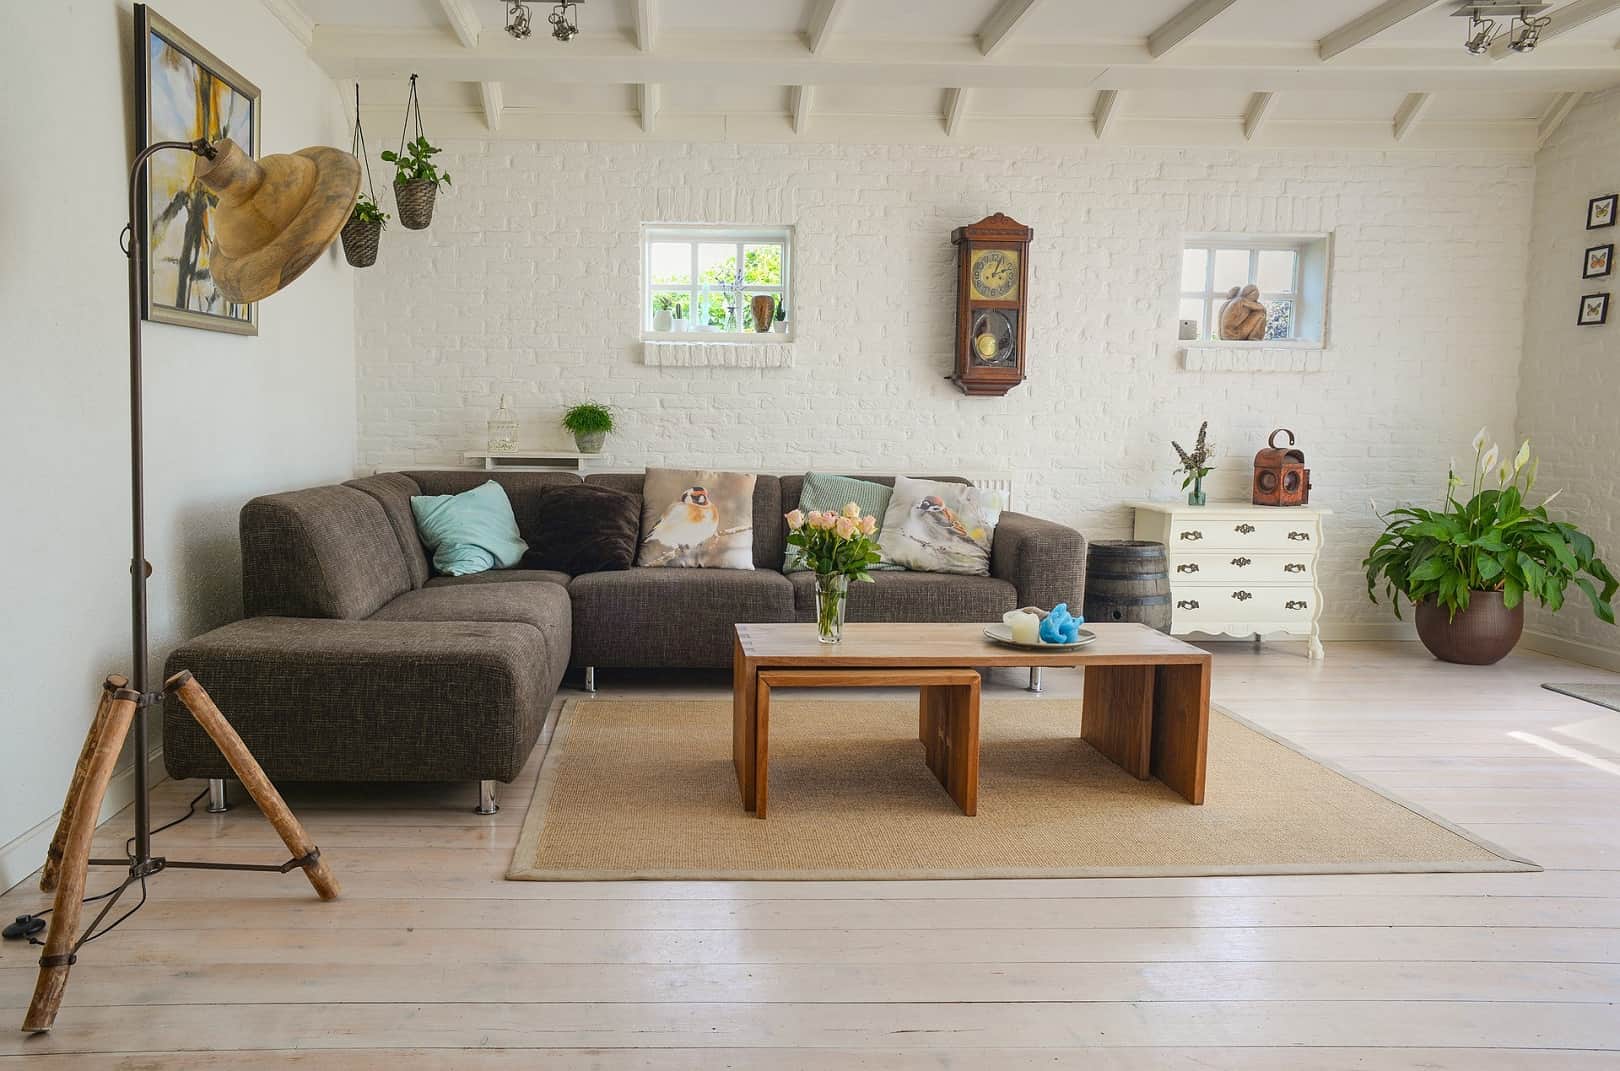 5 Redecorating Tips for Creative and Aesthetic Homes. Casual living room interior with open ceiling beams, whitewashed brickwork imitation and contrasting dark angular sofa